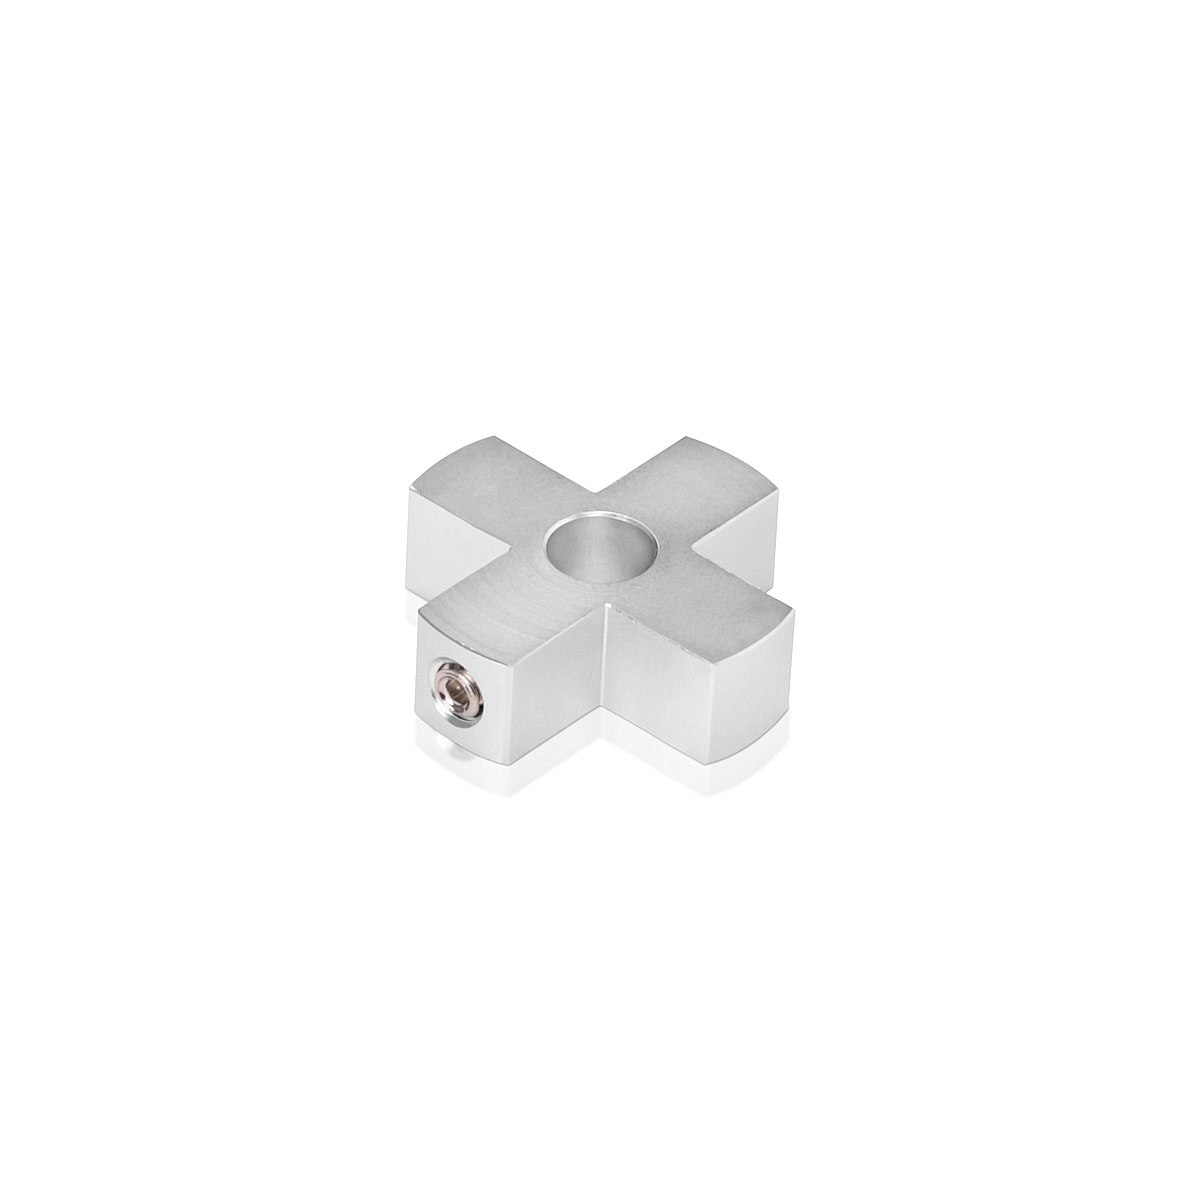 4-Way Standoffs Hub, Diameter: 1 1/4'', Thickness: 3/8'', Clear Anodized Aluminum [Required Material Hole Size: 7/16'']